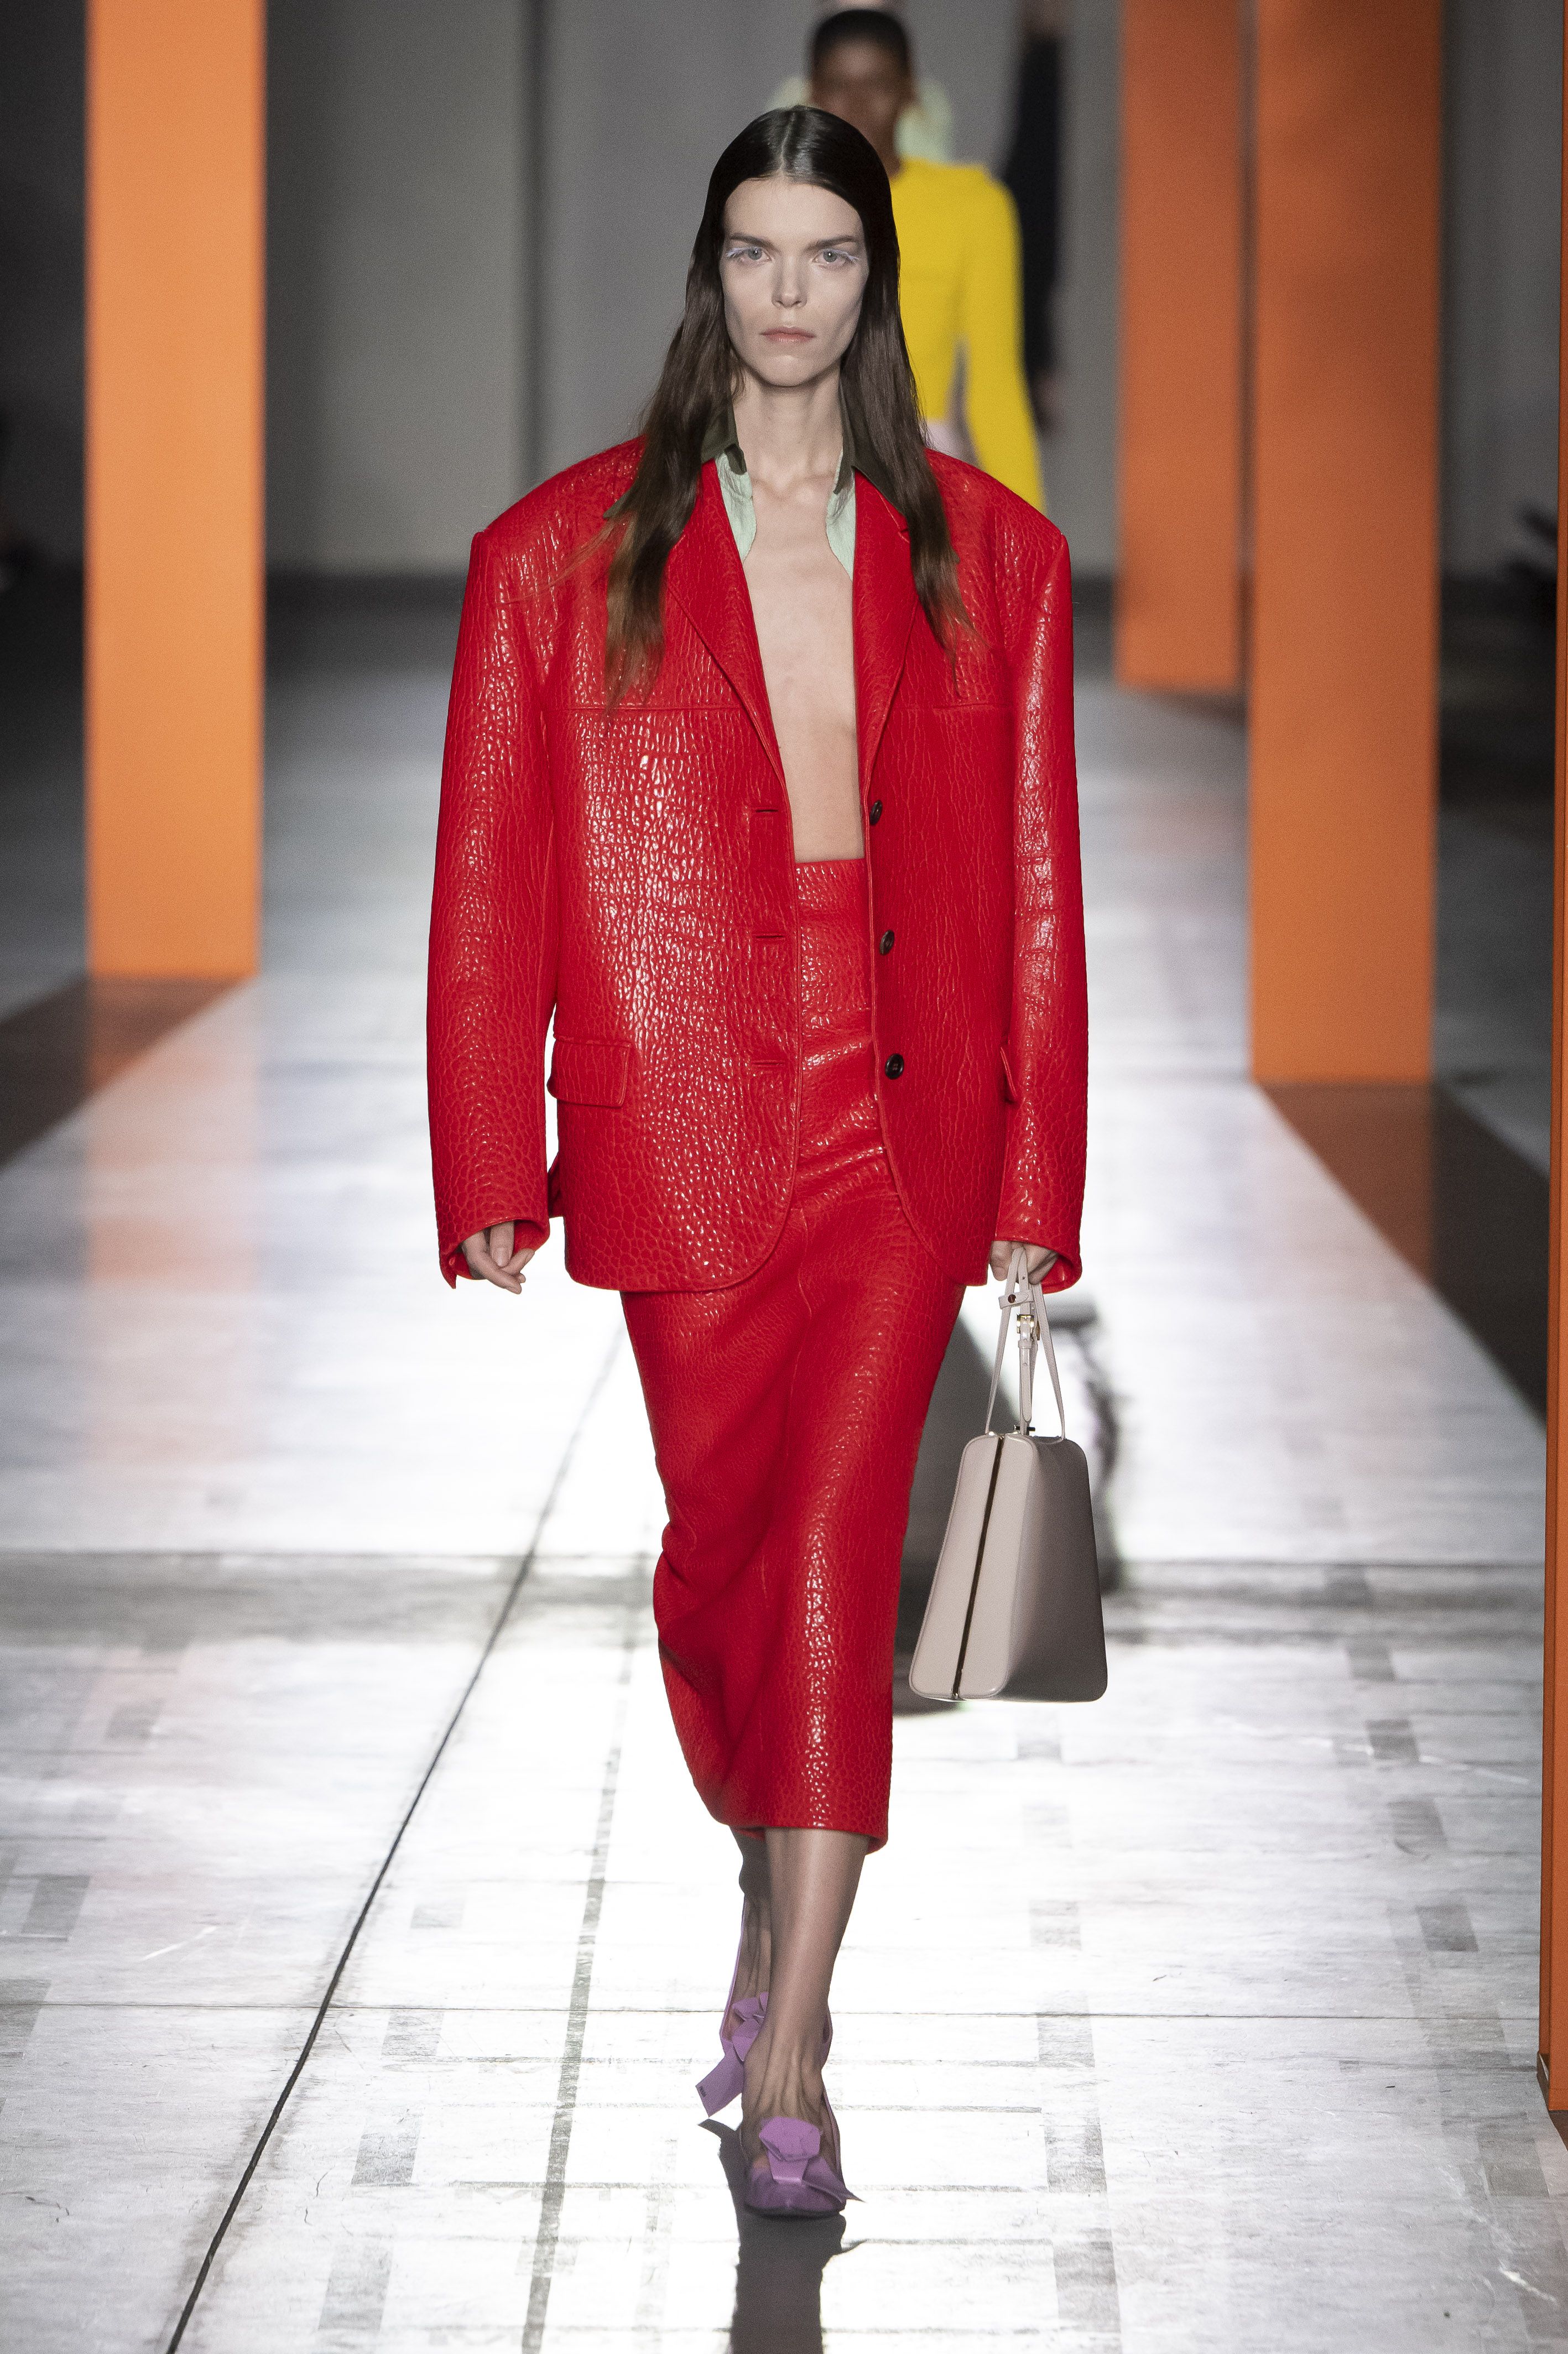 Prada Fights Glamour, Welcomes Beauty